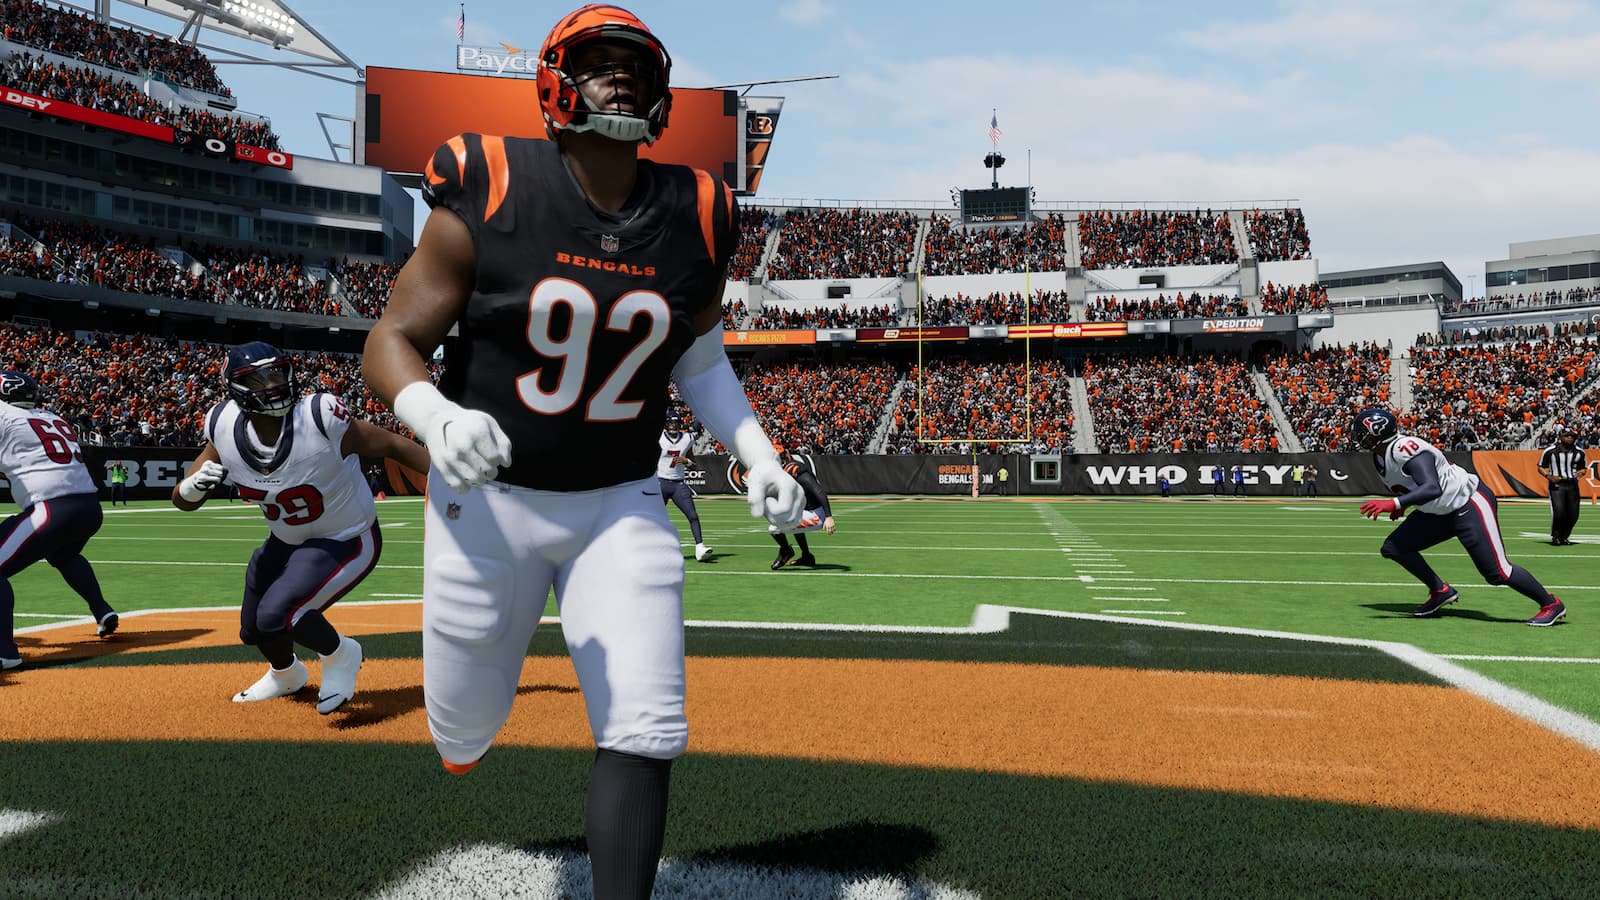 Bengals player in Madden 24